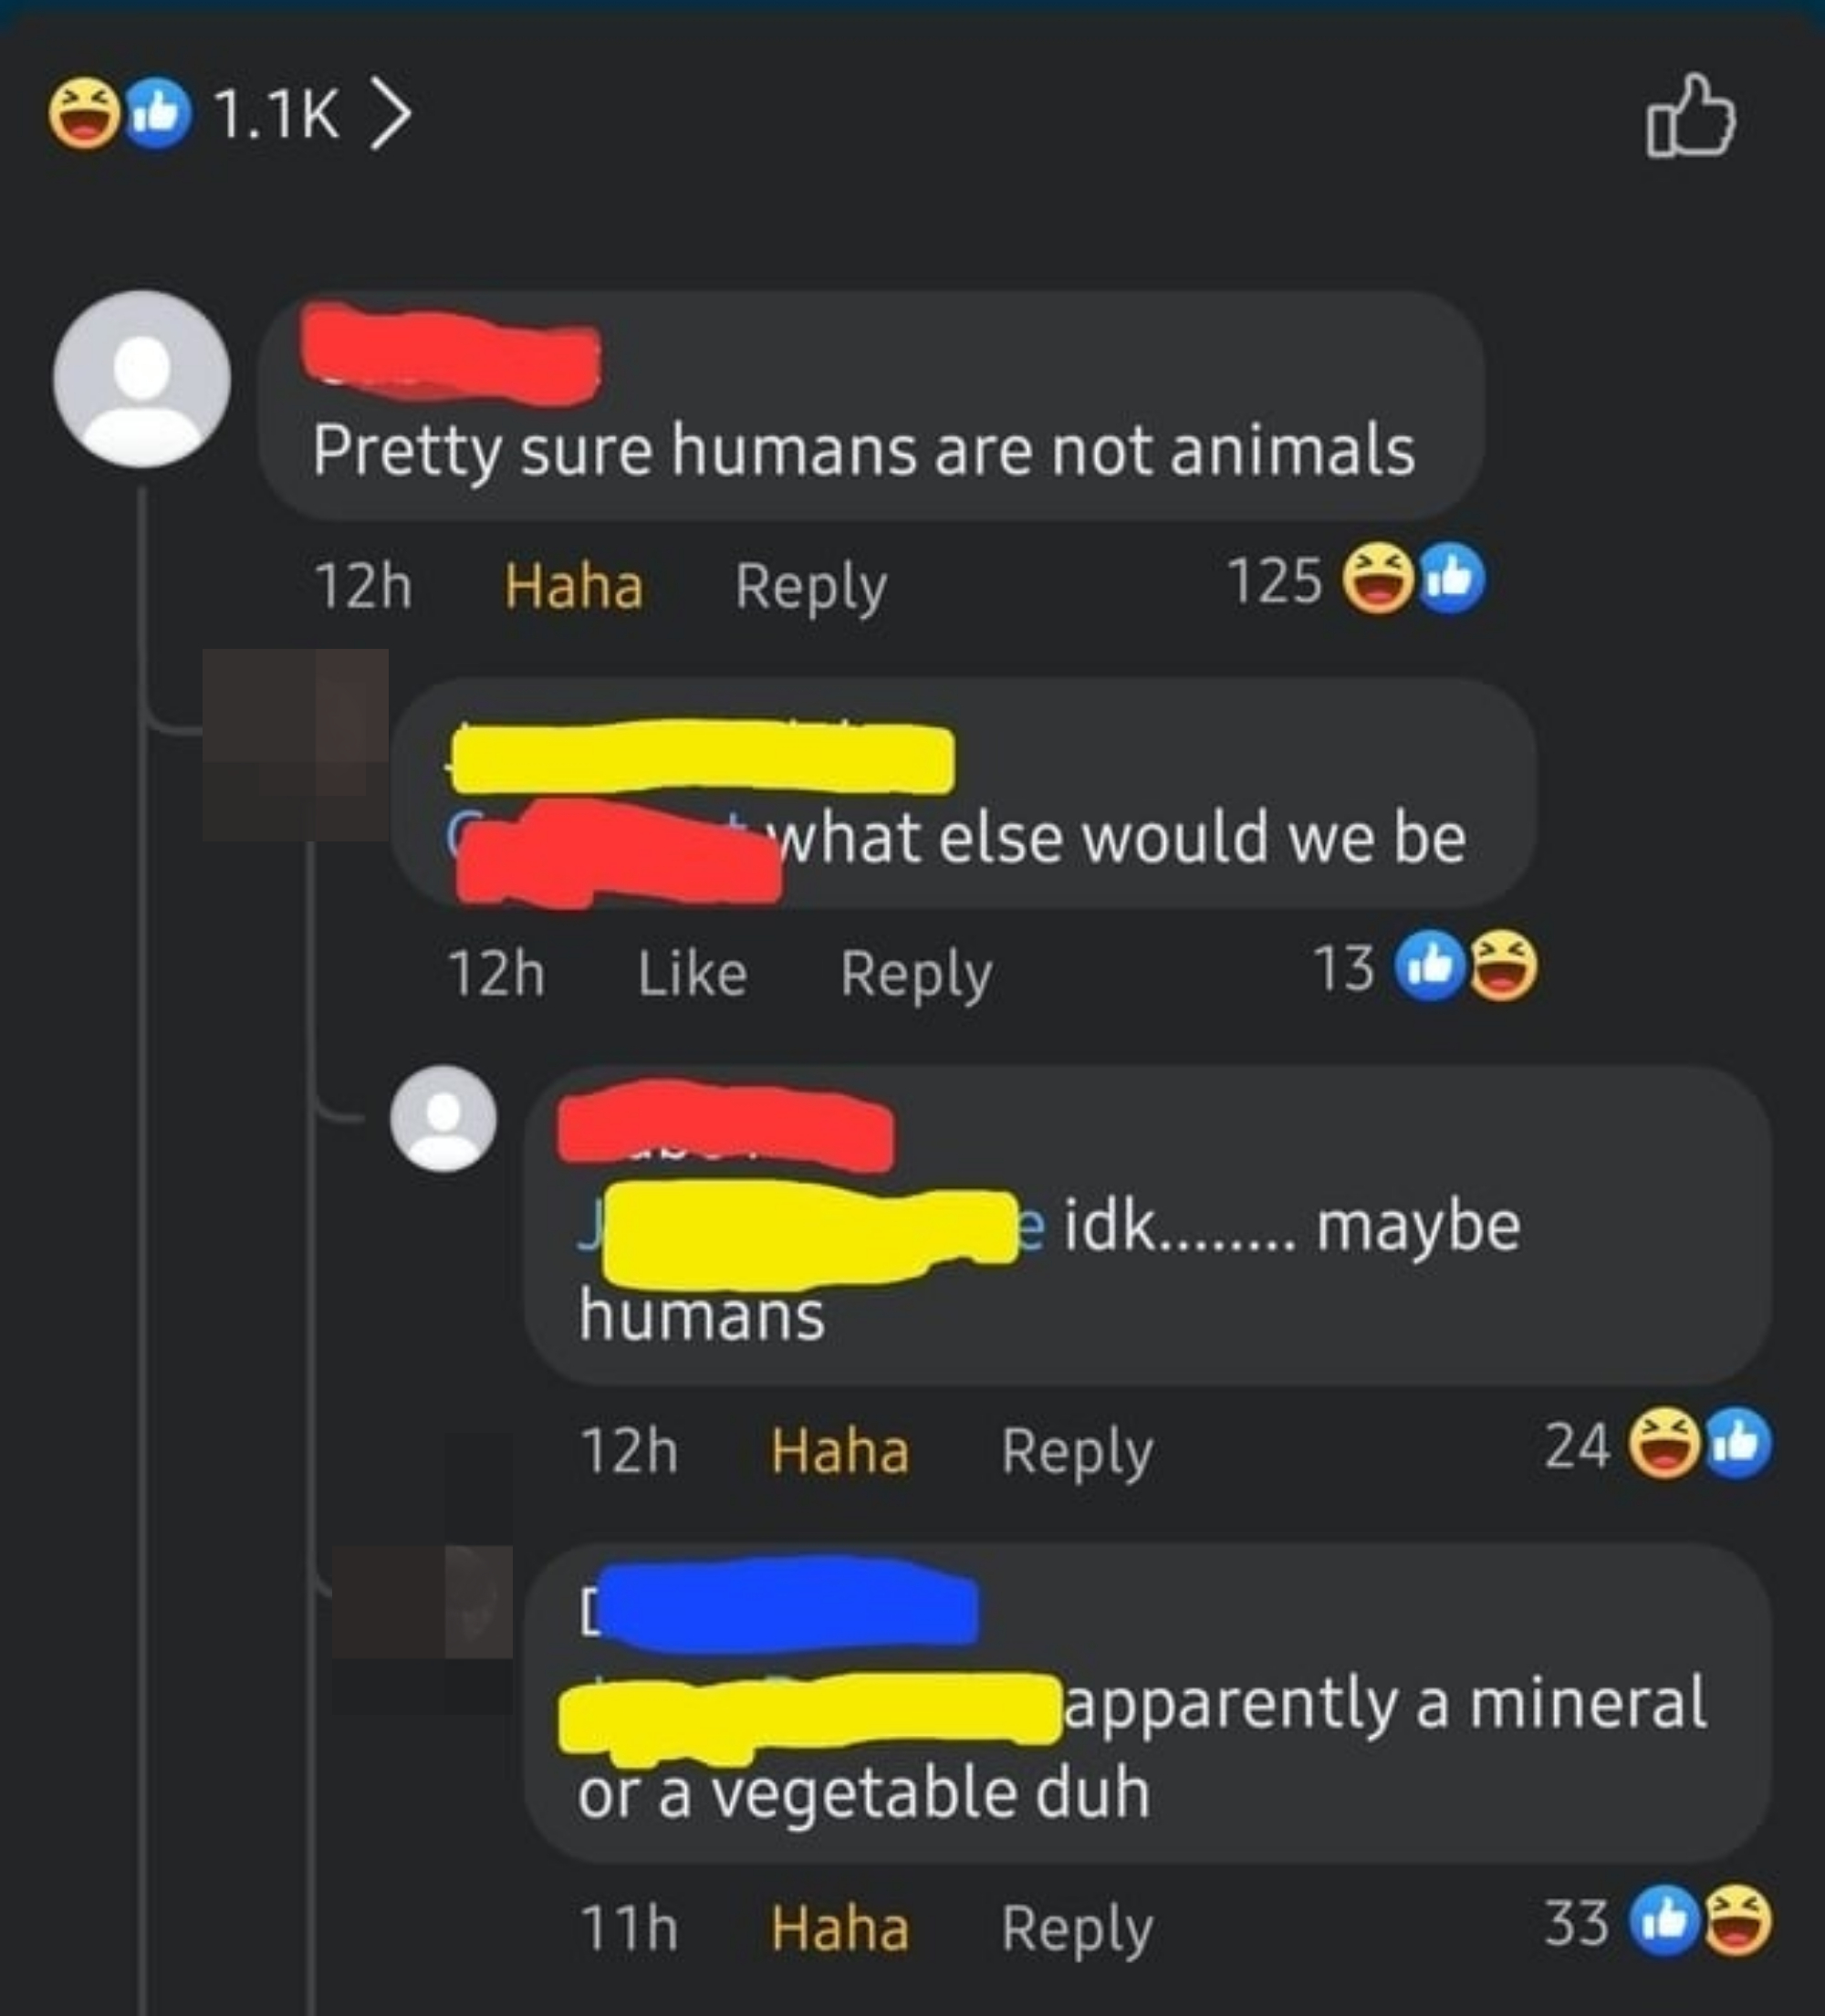 Someone says humans are not animals, a second person asks what they are then, and the first person responds &quot;idk maybe humans&quot;